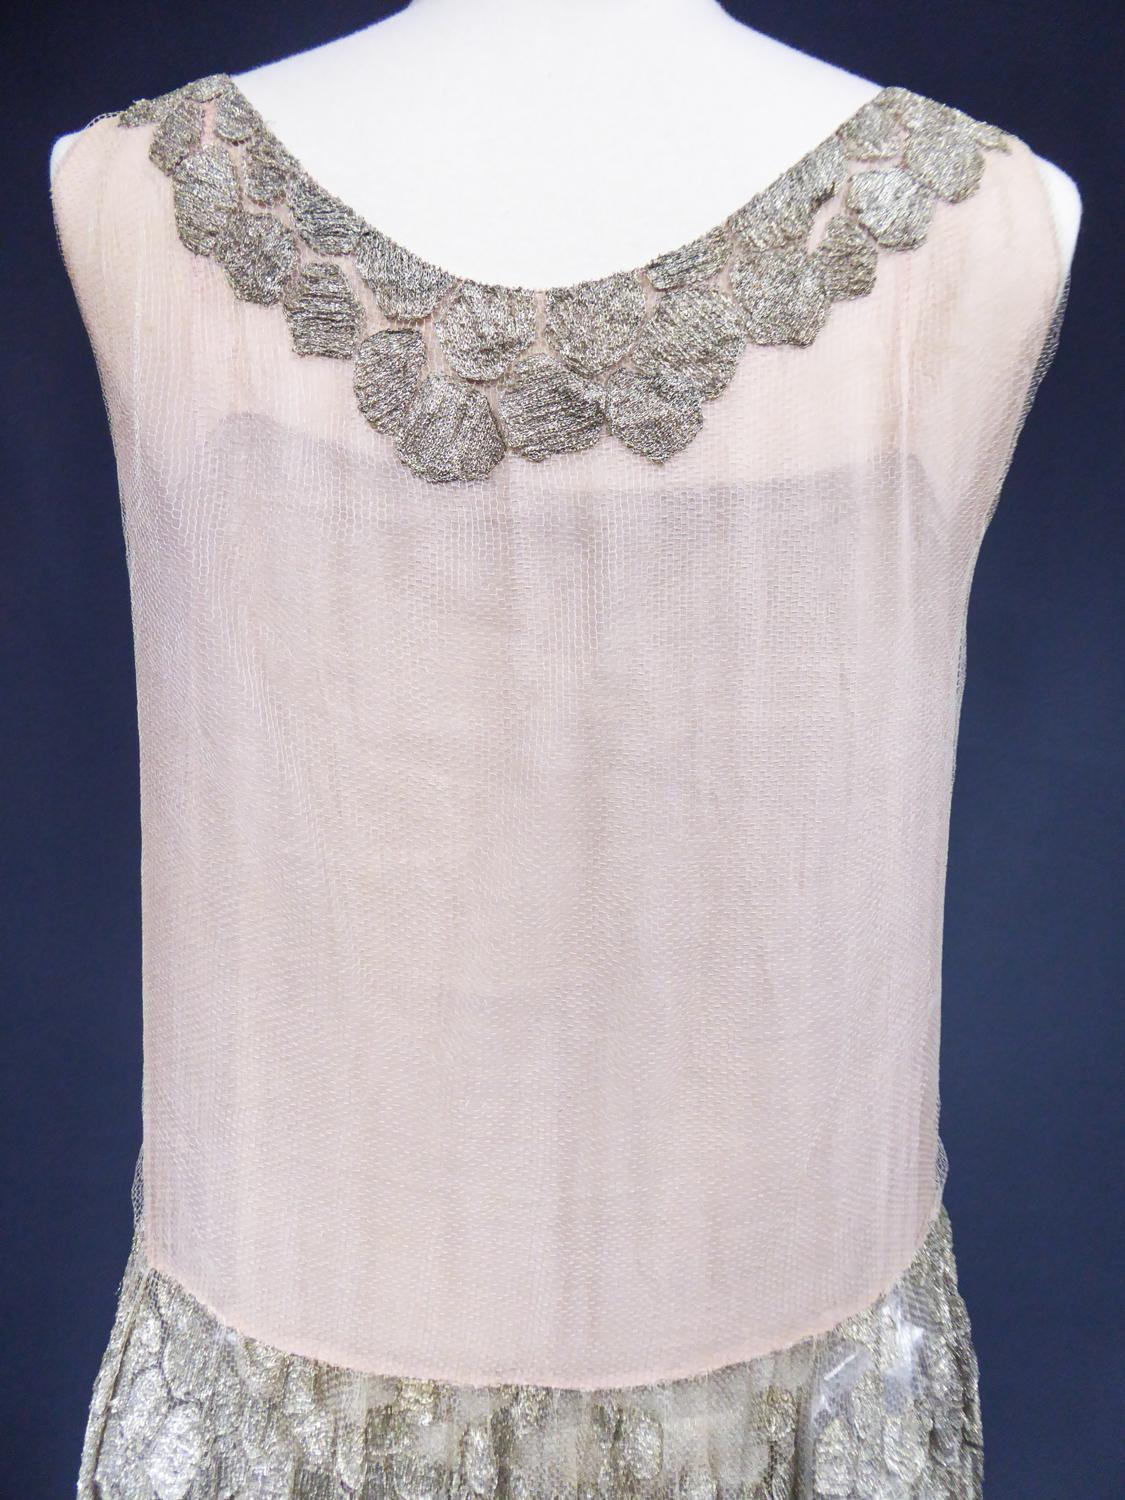 French Couture Art Deco Flapper Dress Net and Voile Embroidered Circa 1920/1925 For Sale 3